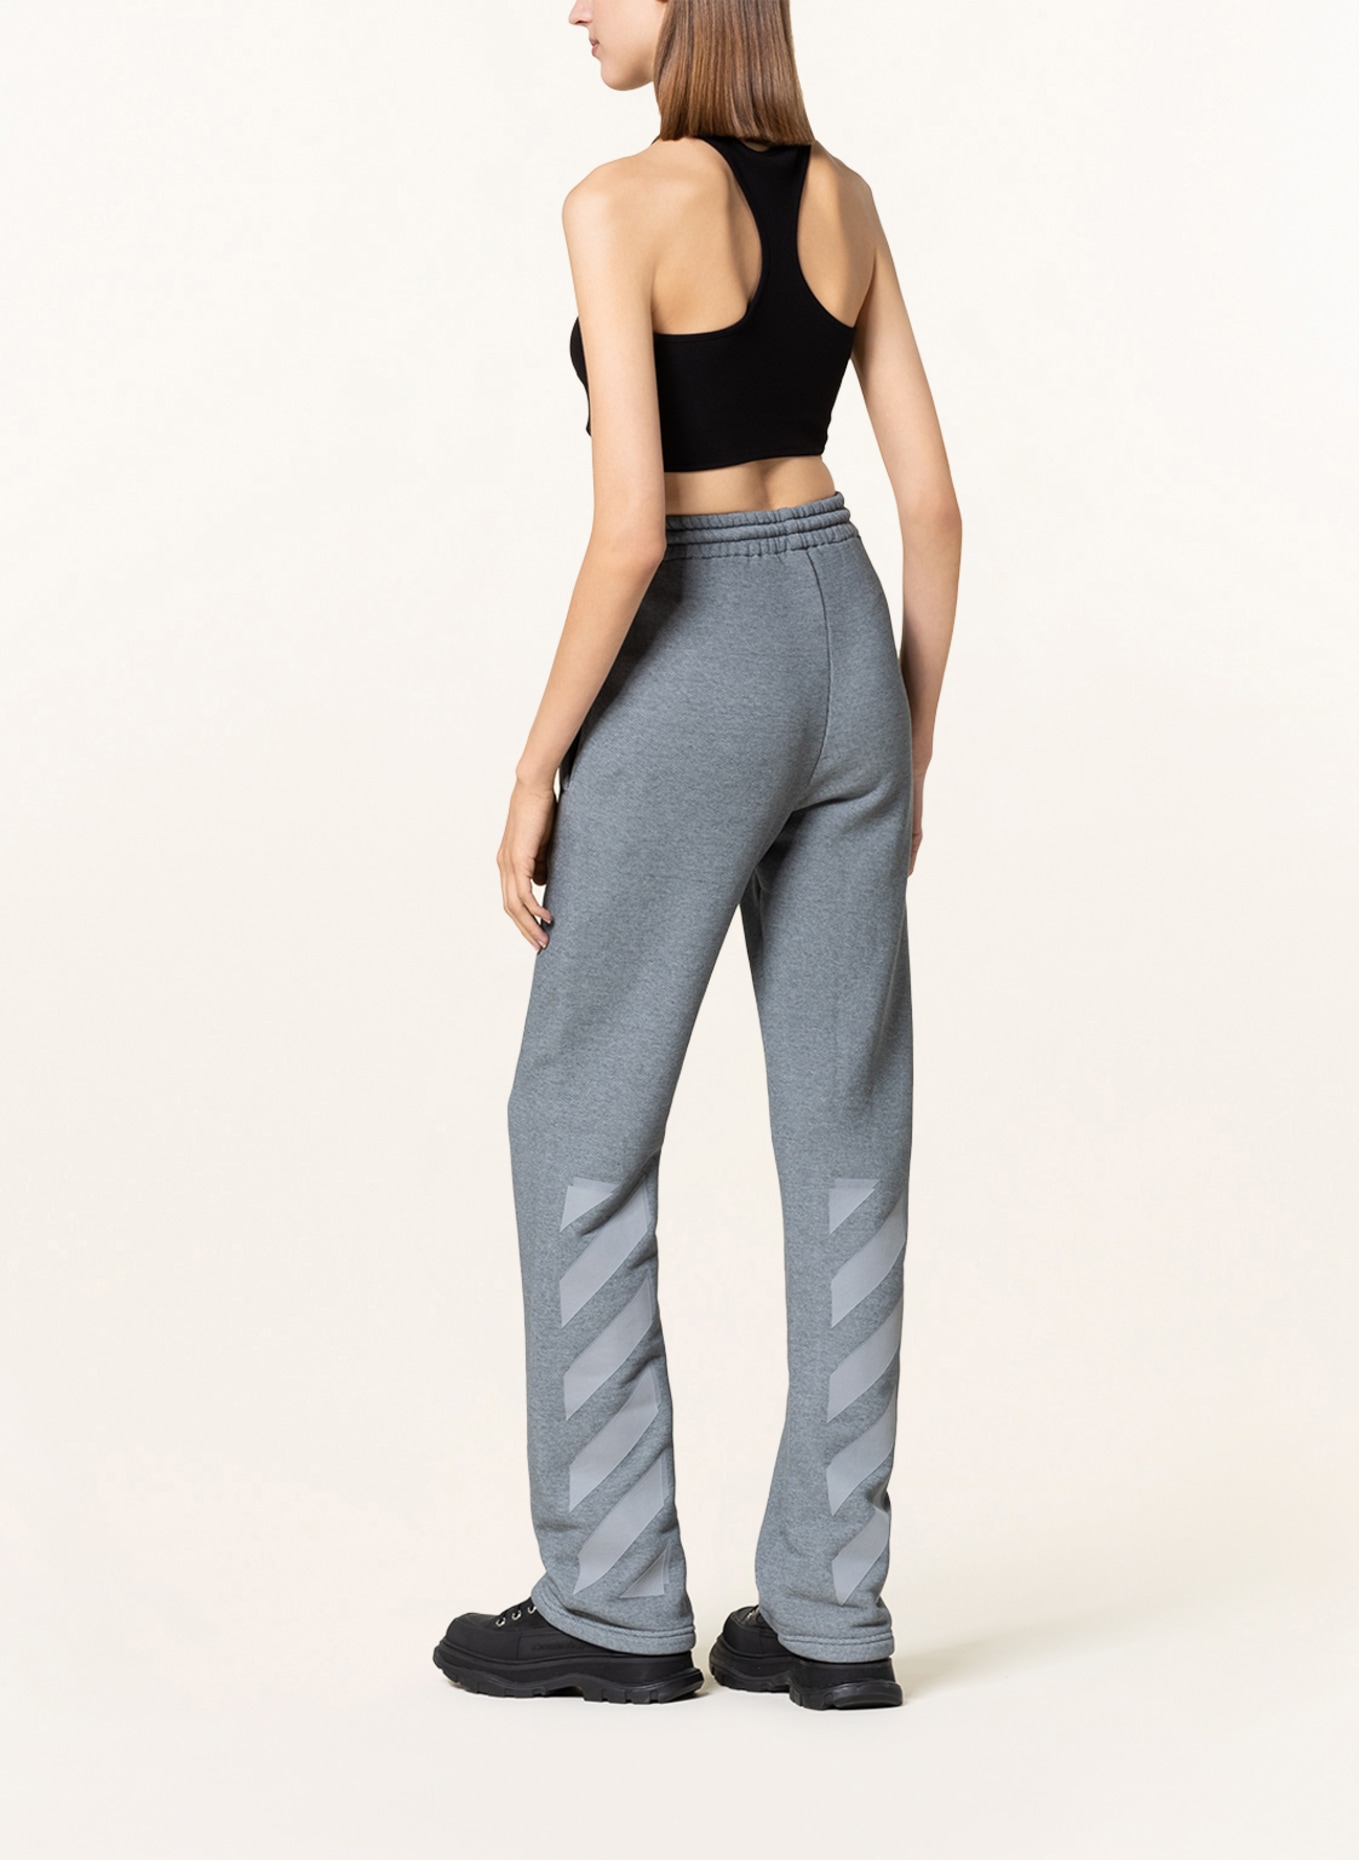 Off-White Pants in jogger style , Color: GRAY (Image 3)